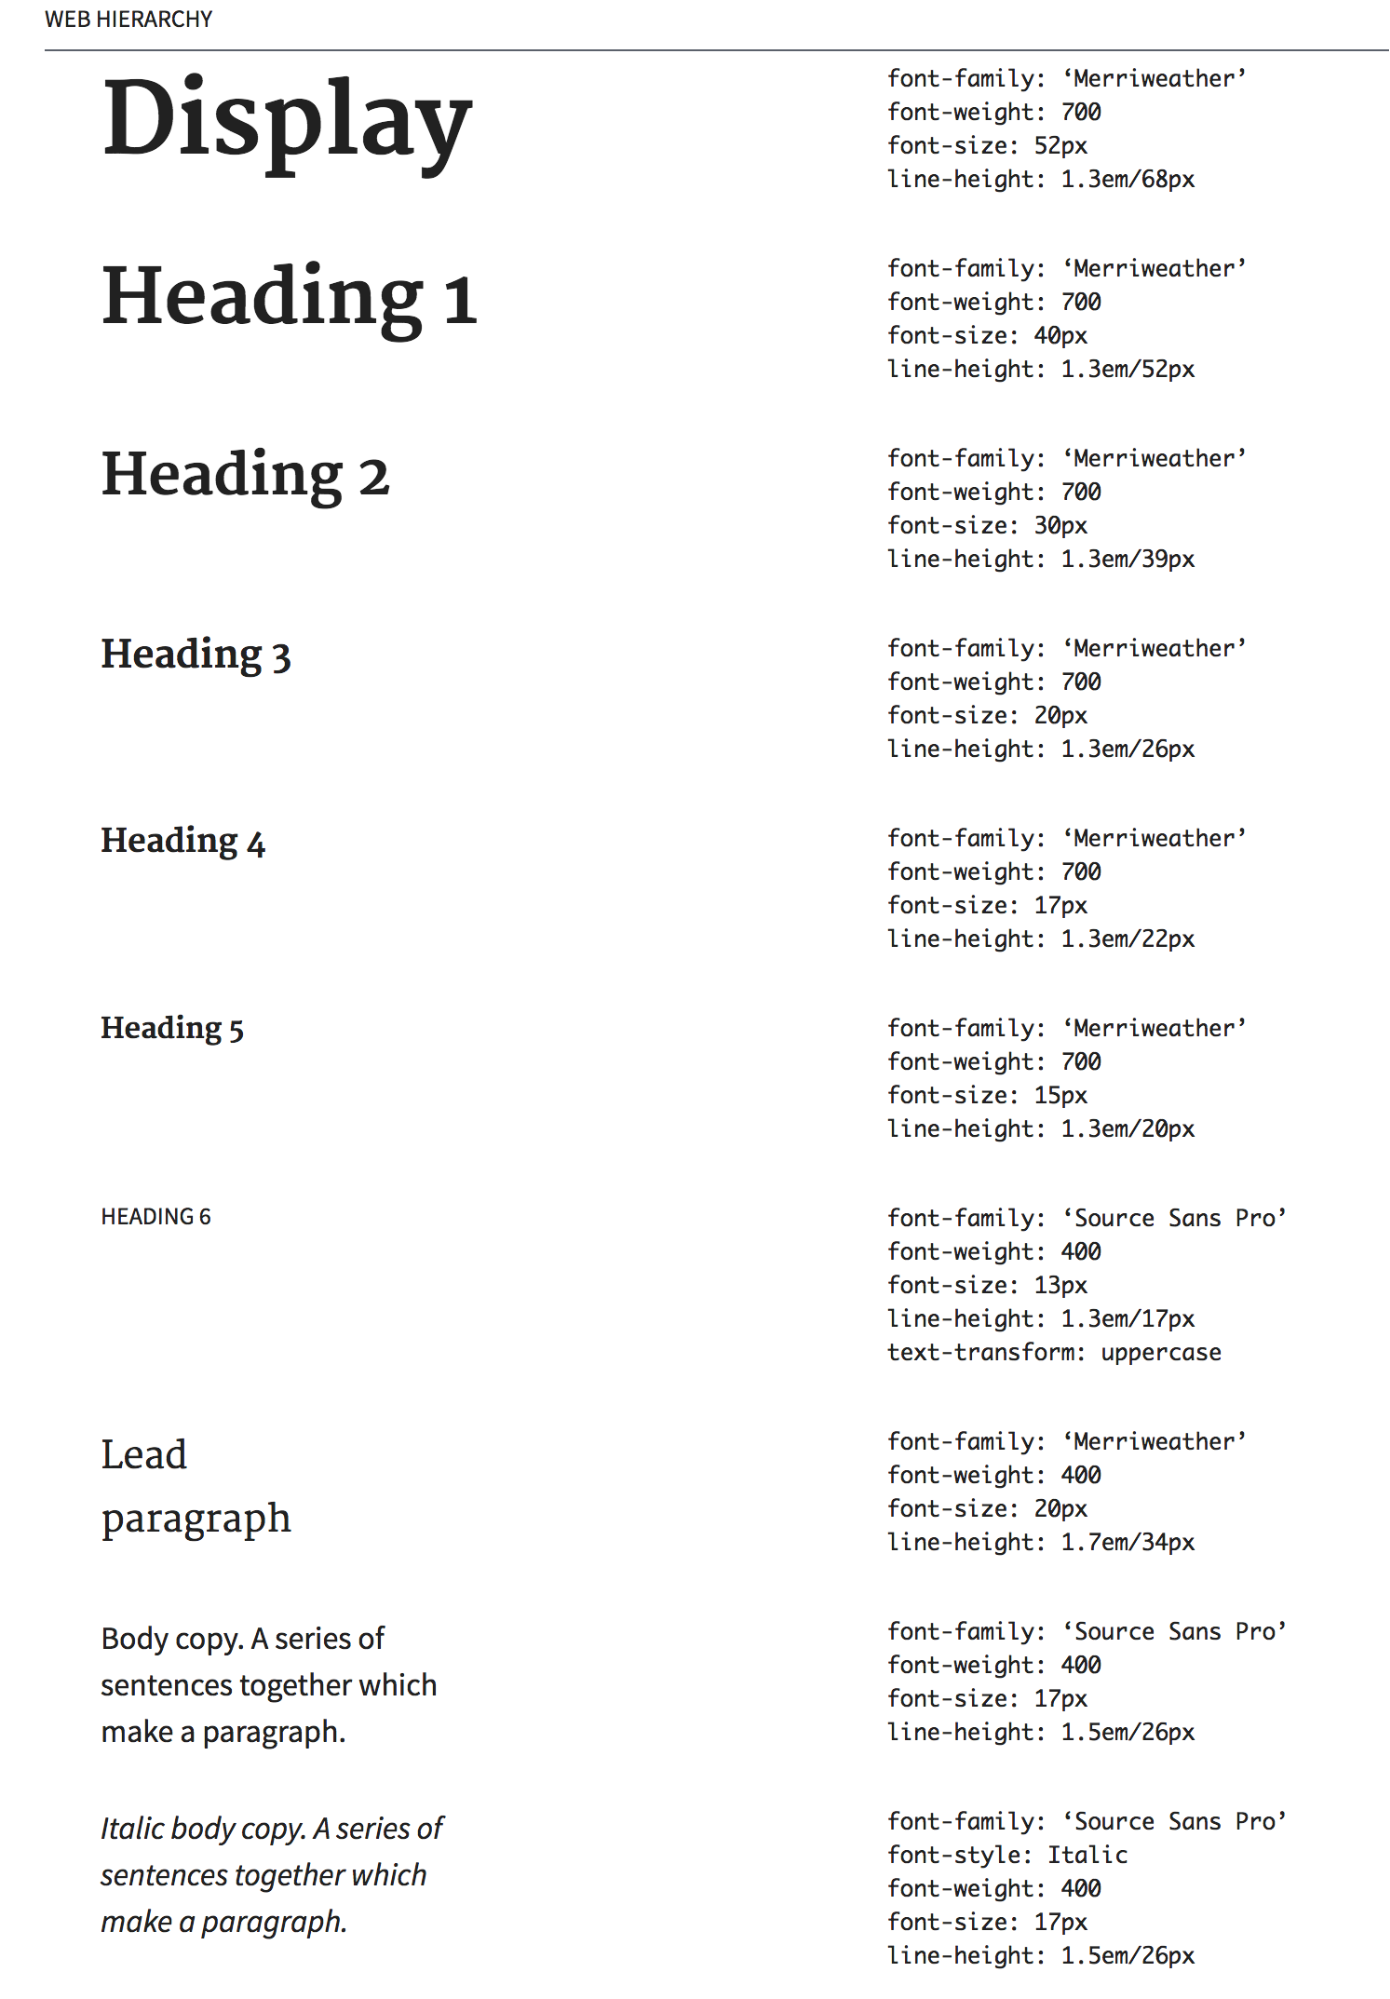 A list of font examples. Merriweather headings and Source Sans Pro body font pairing